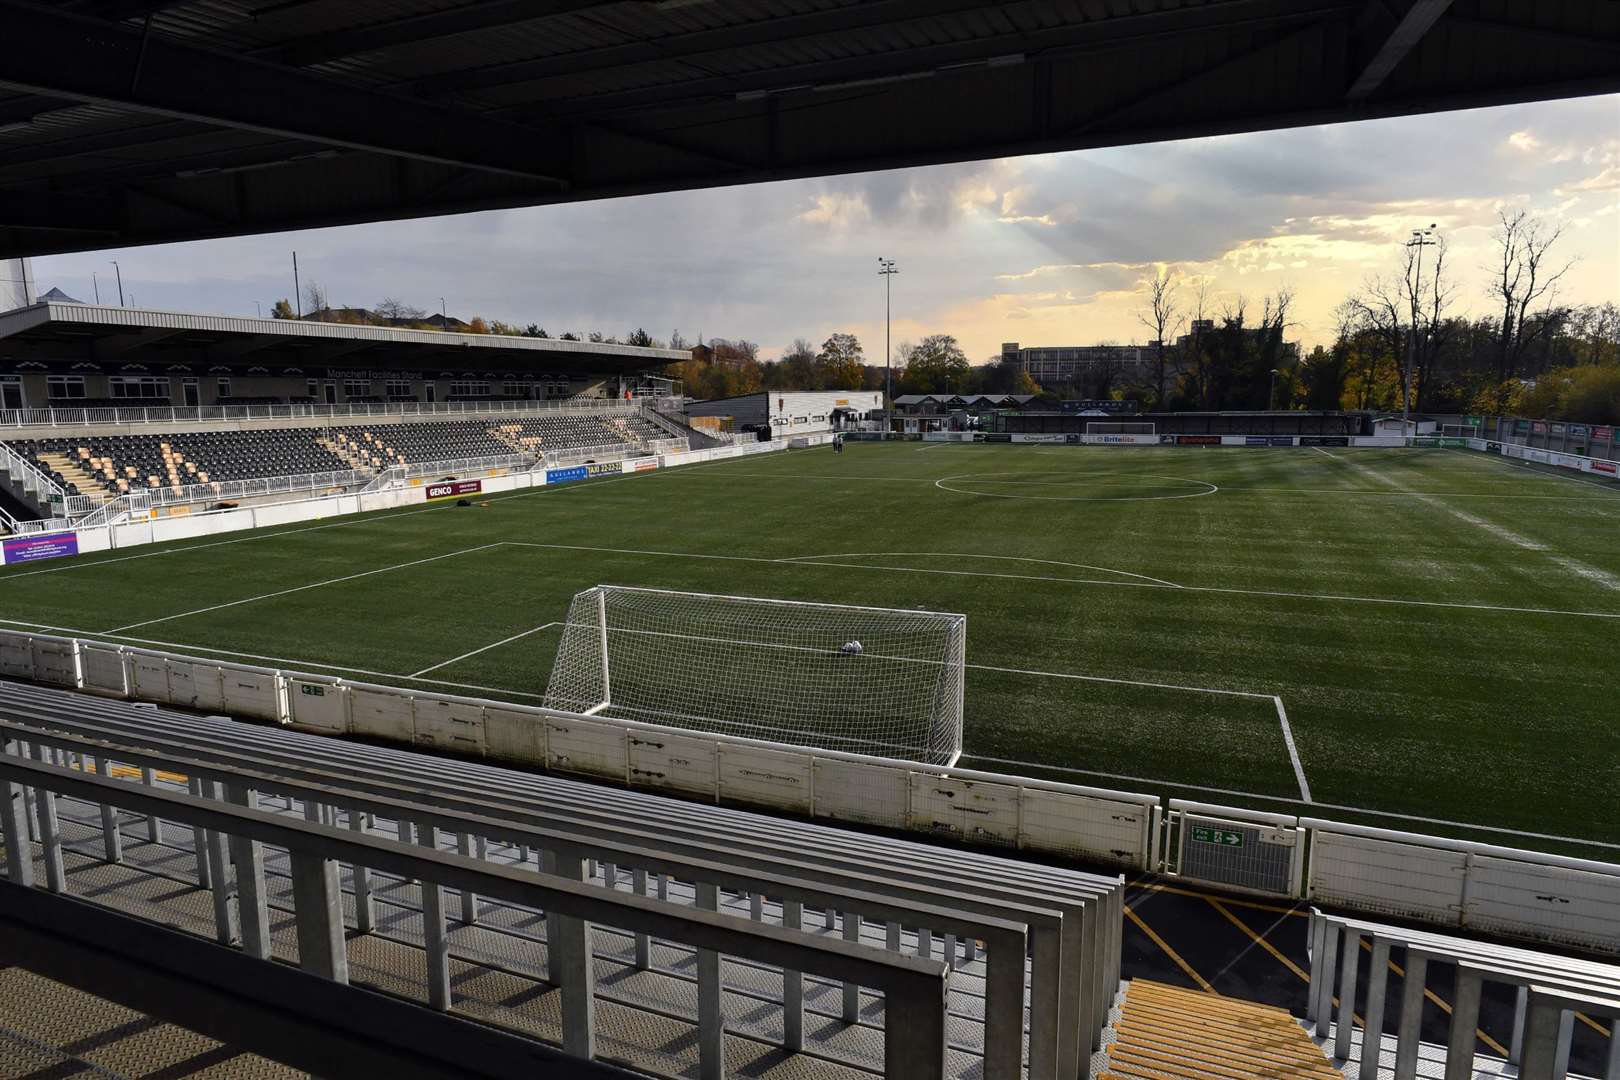 Maidstone United have voted to end the season